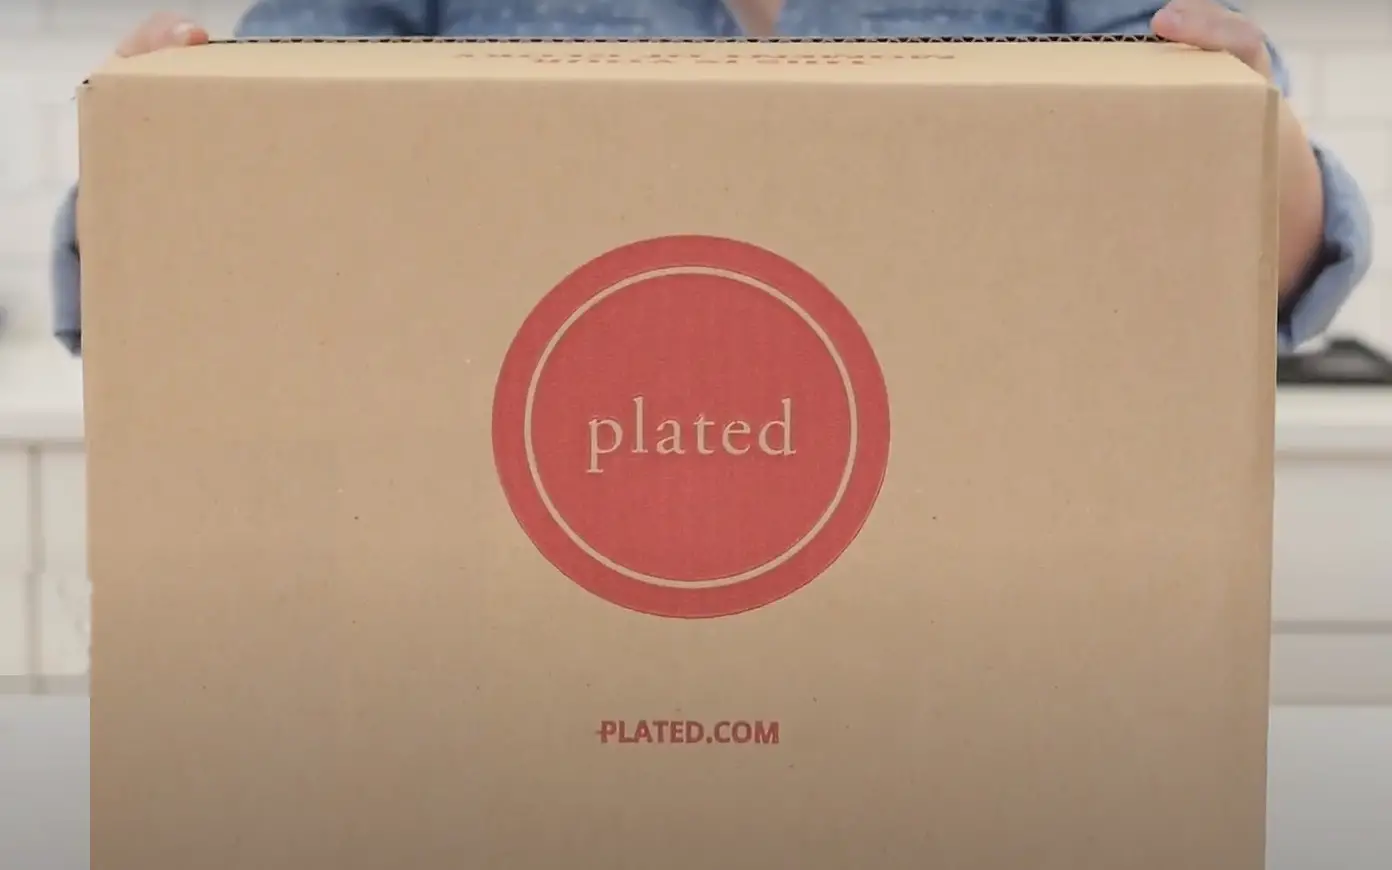 About The Founders Of Plated